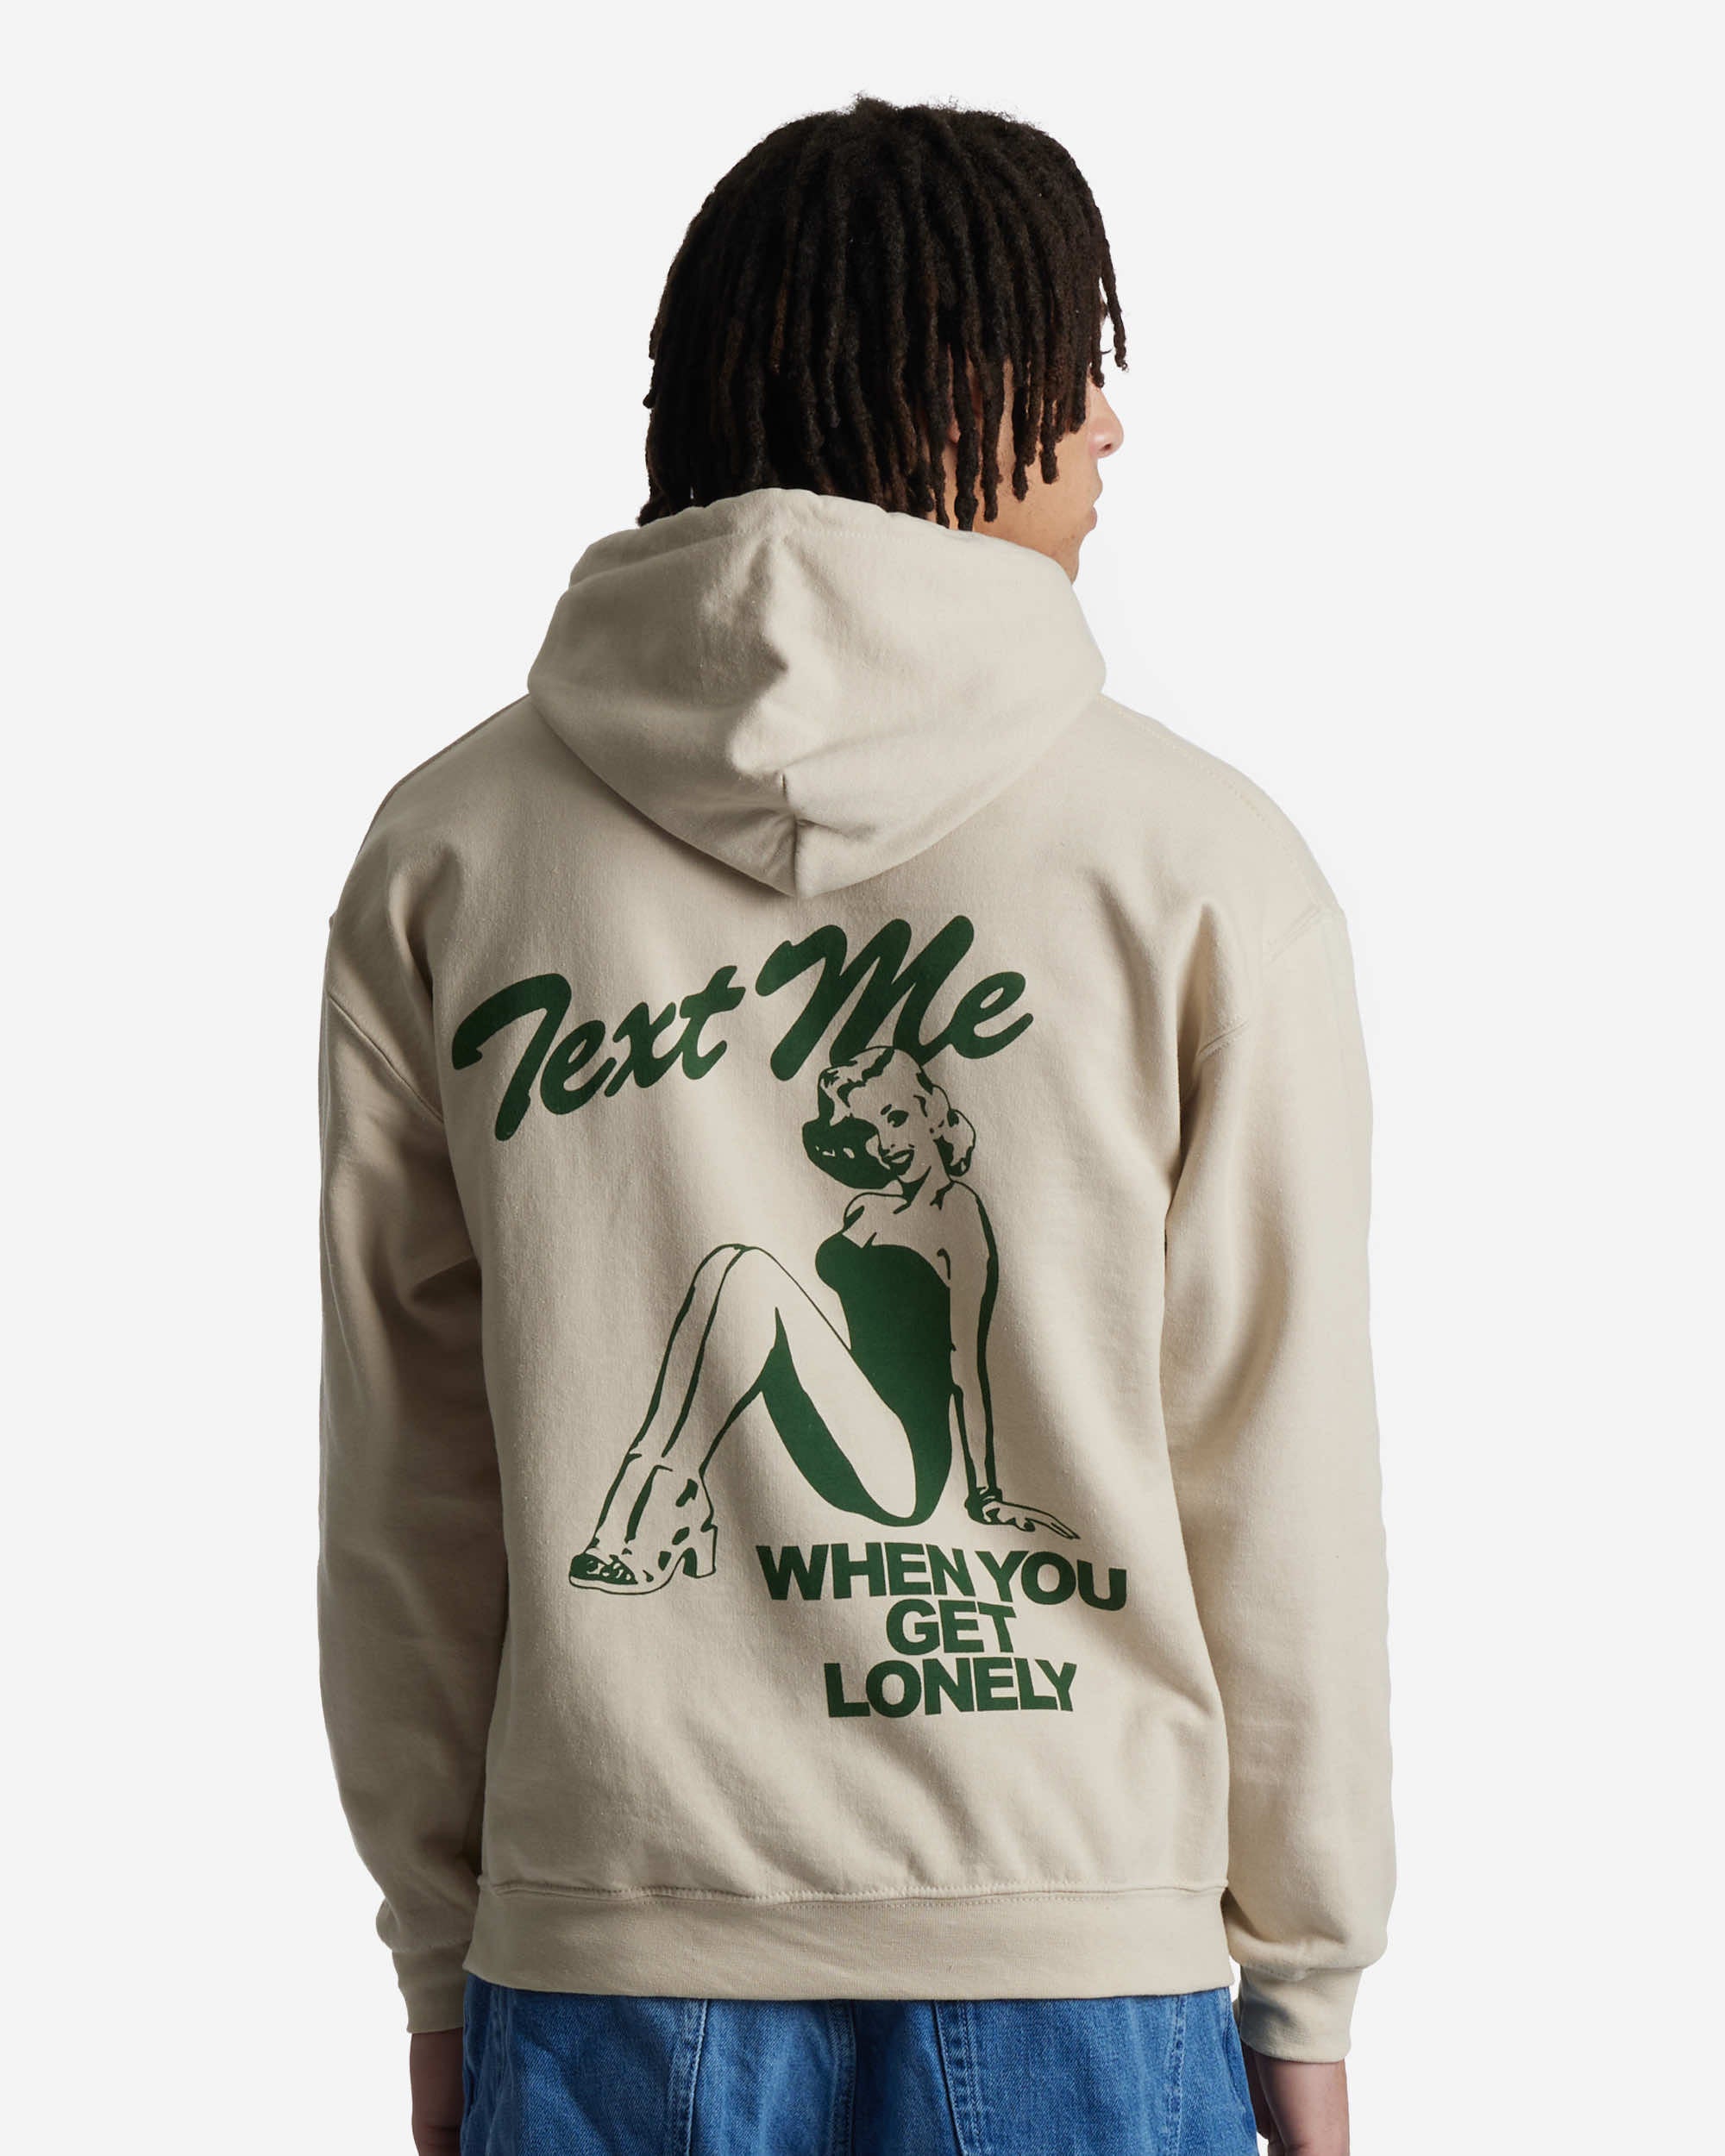 Text Me When You Get Lonely Hoodie